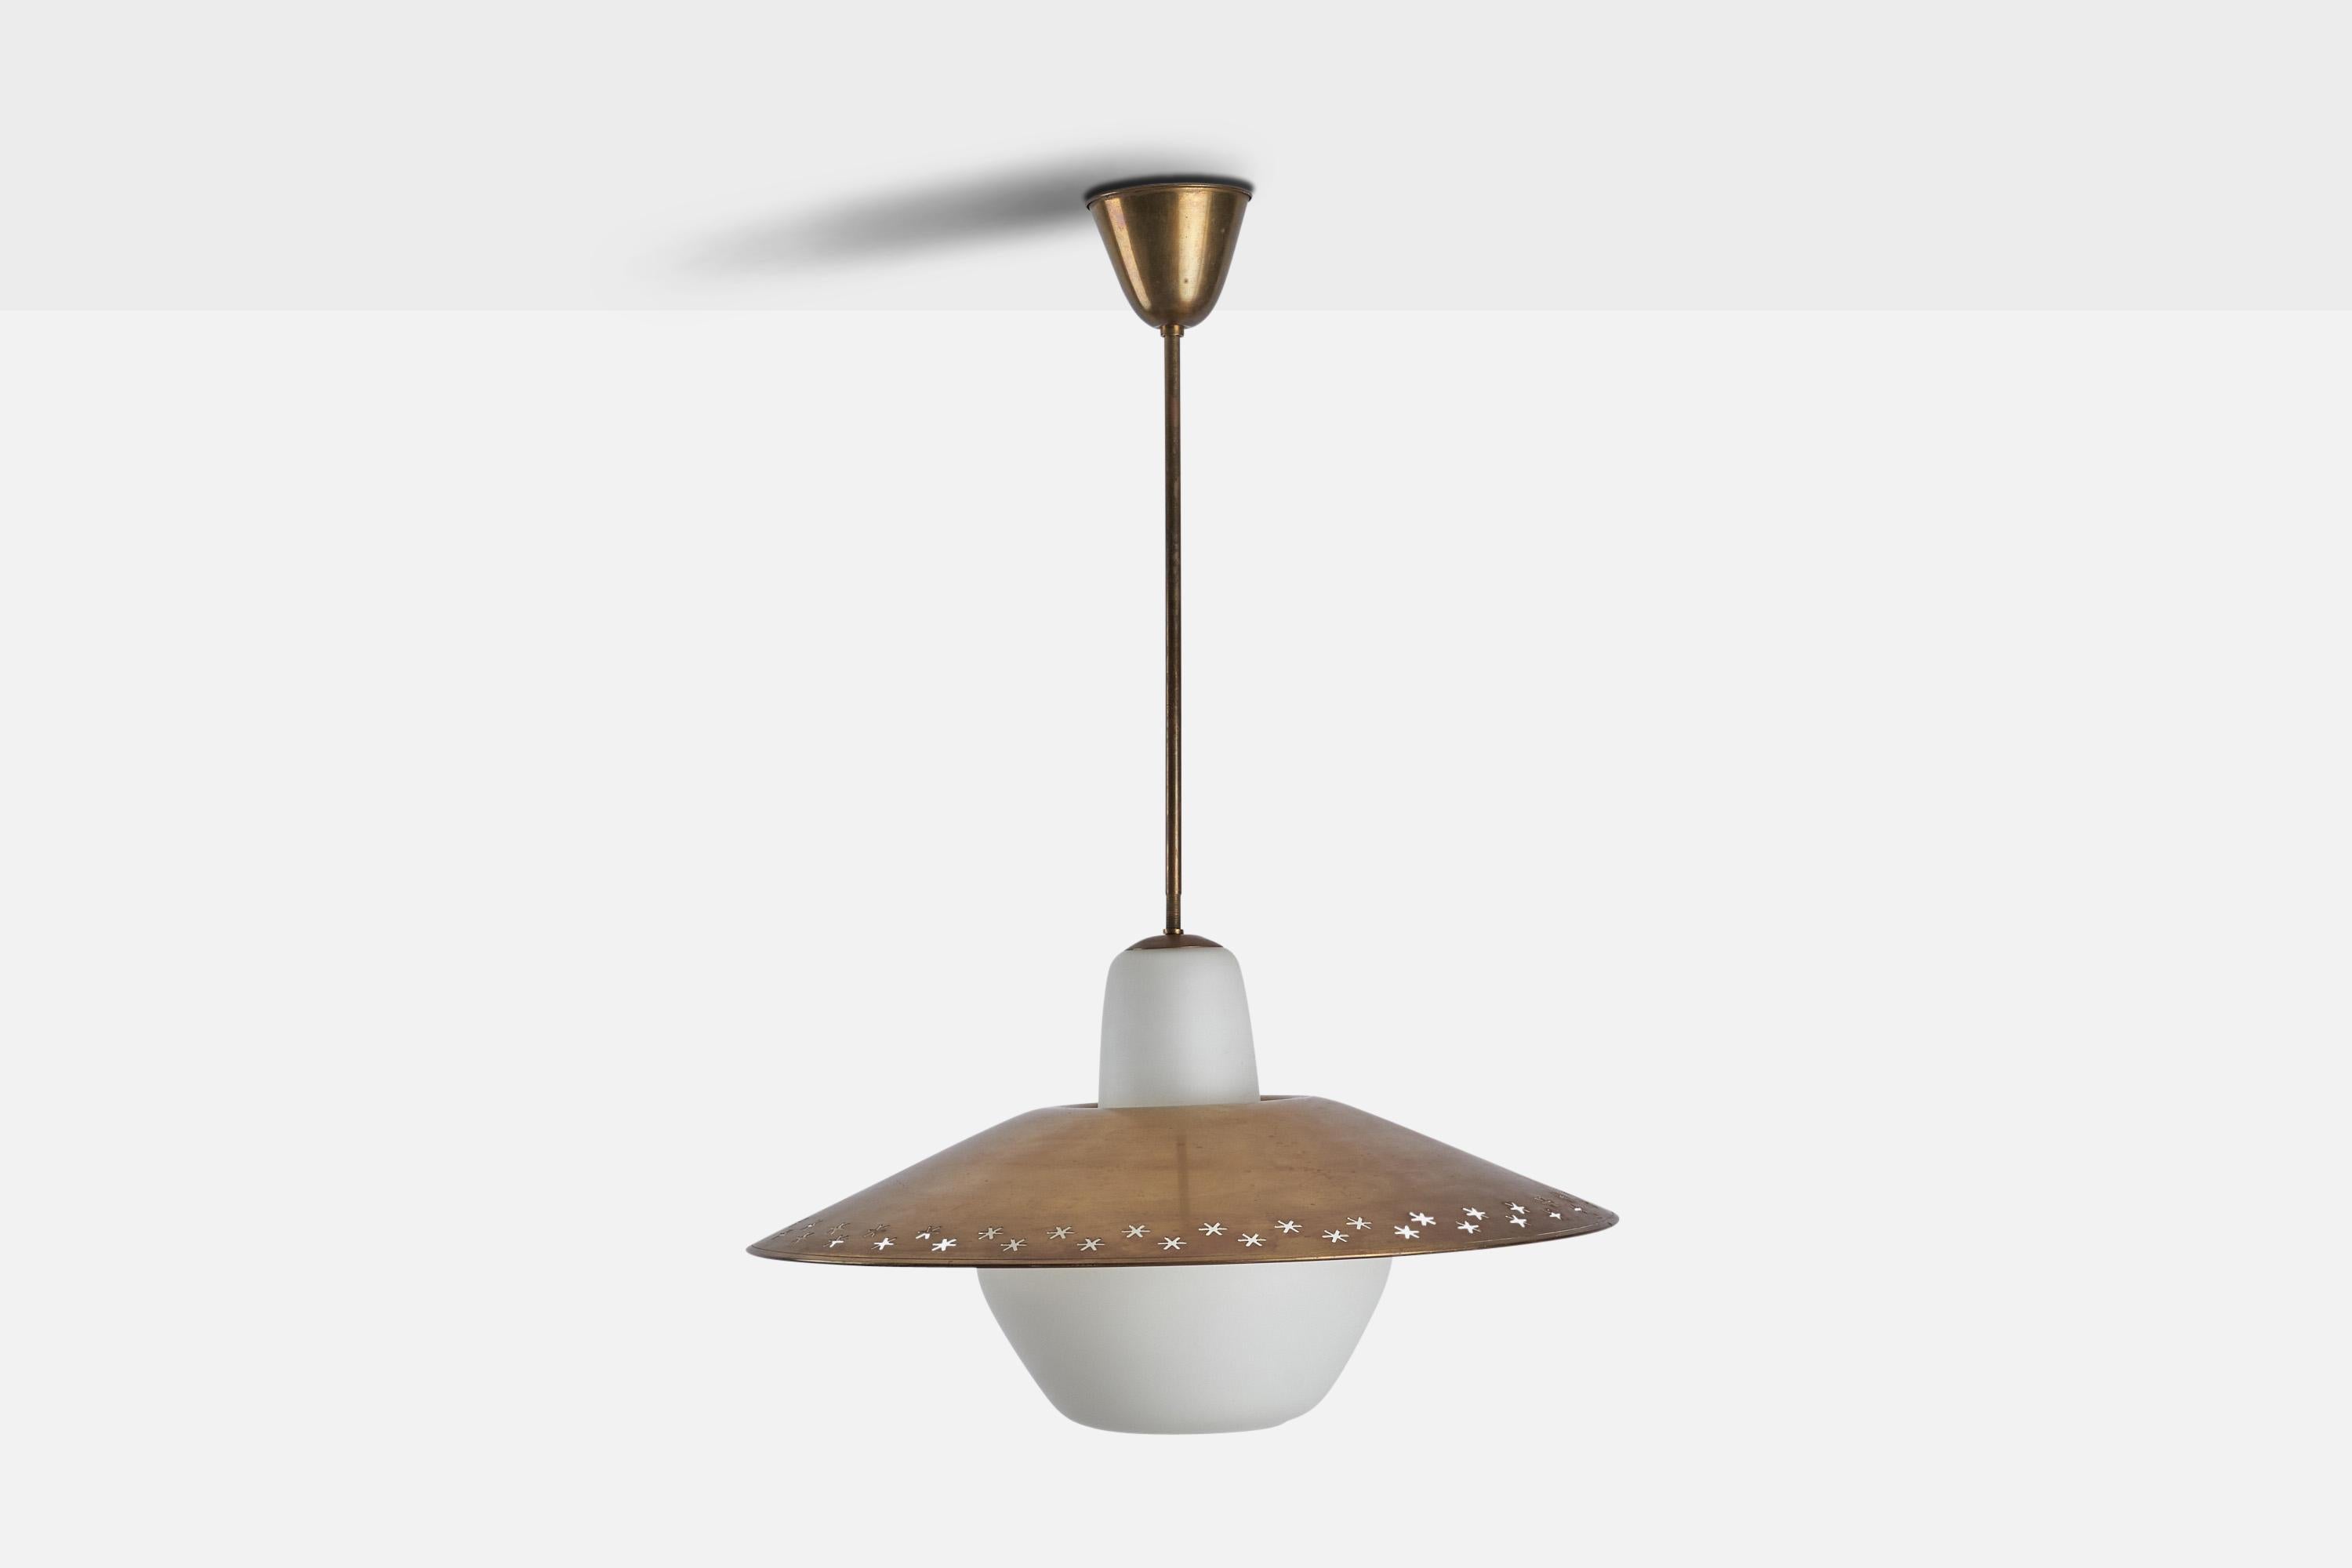 
A brass and opaline glass pendant light designed and produced in Sweden, c. 1940s.
Dimensions of canopy (inches) : 3.15” H x 4” Diameter
Socket takes standard E-26 bulb. There is no maximum wattage stated on the fixture. All lighting will be